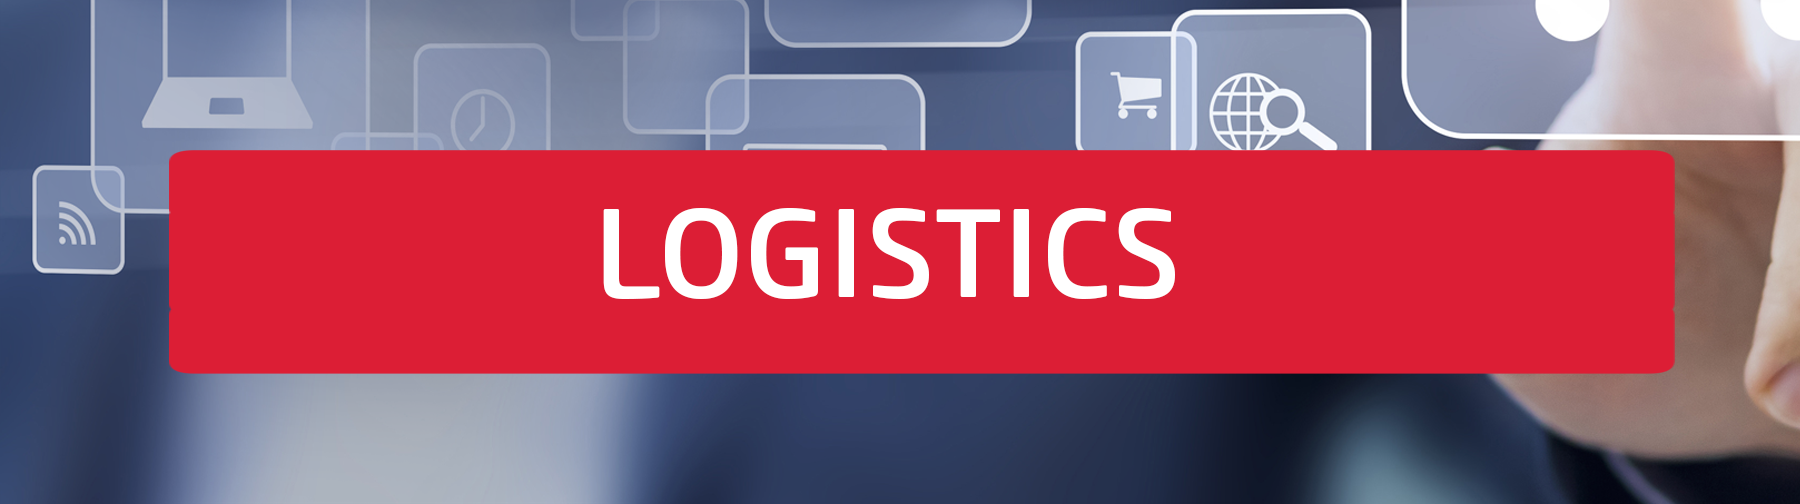 Compete With Online Marketplaces- Logistics1